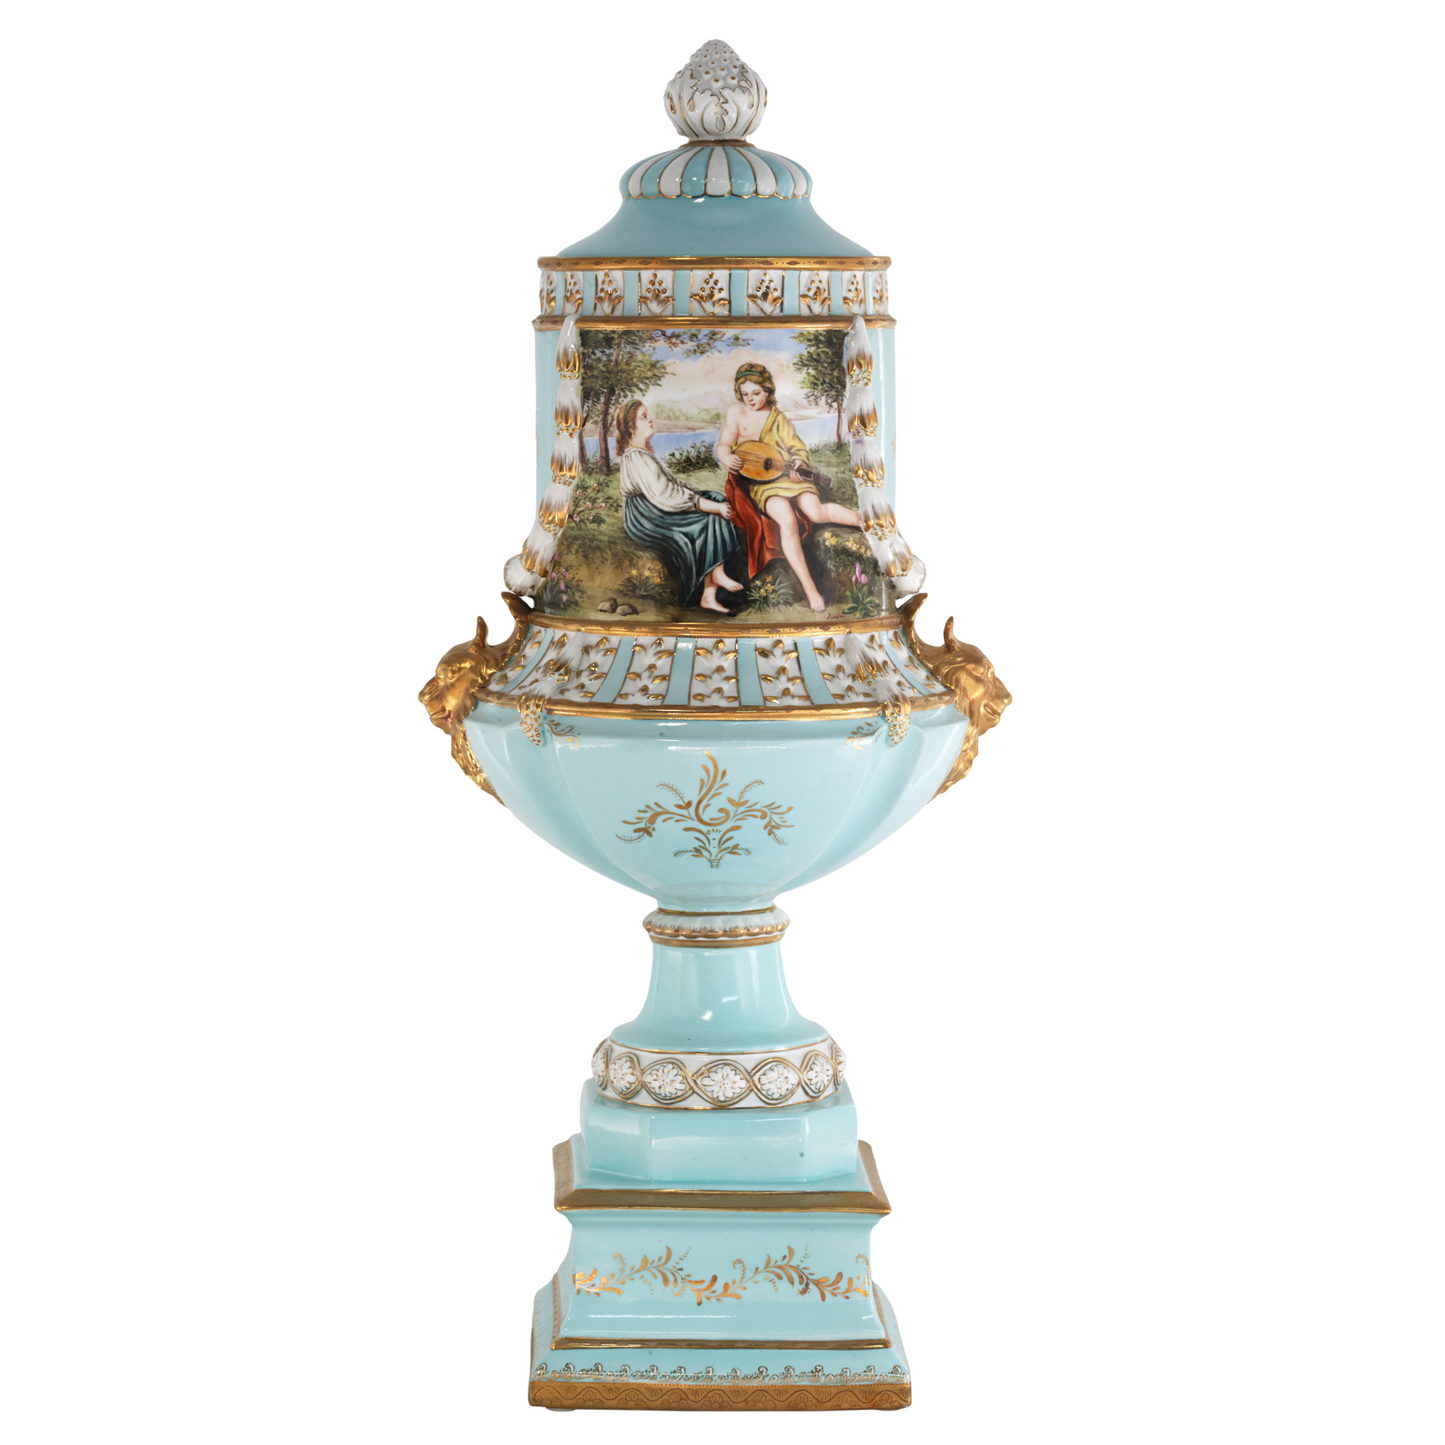 Teal Hand-painted French Style Urn with Rococo Motifs